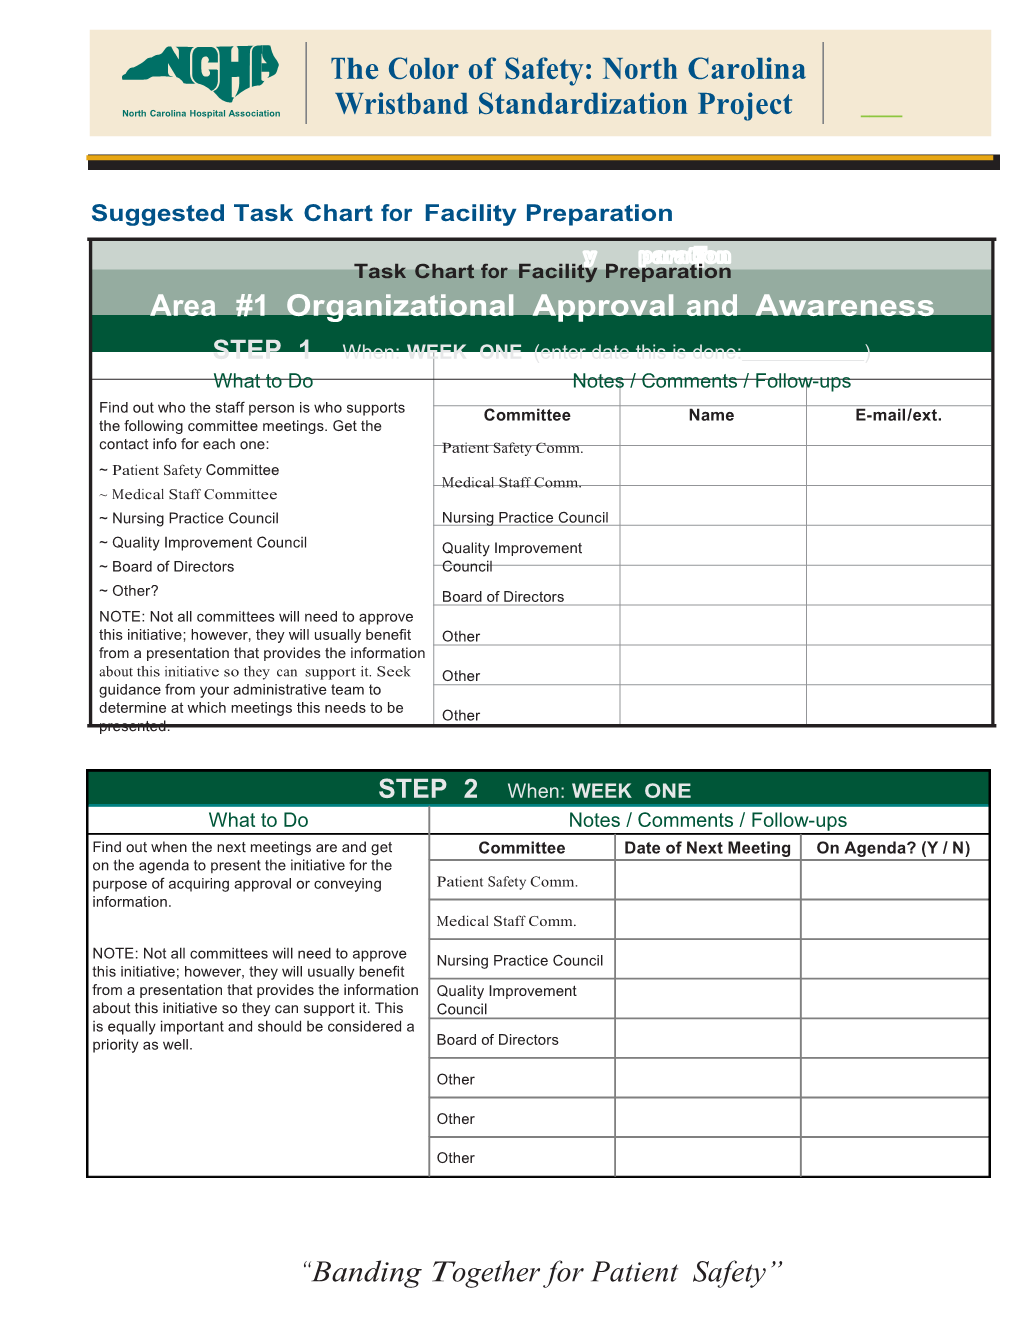 Suggested Task Chart for Facility Preparation